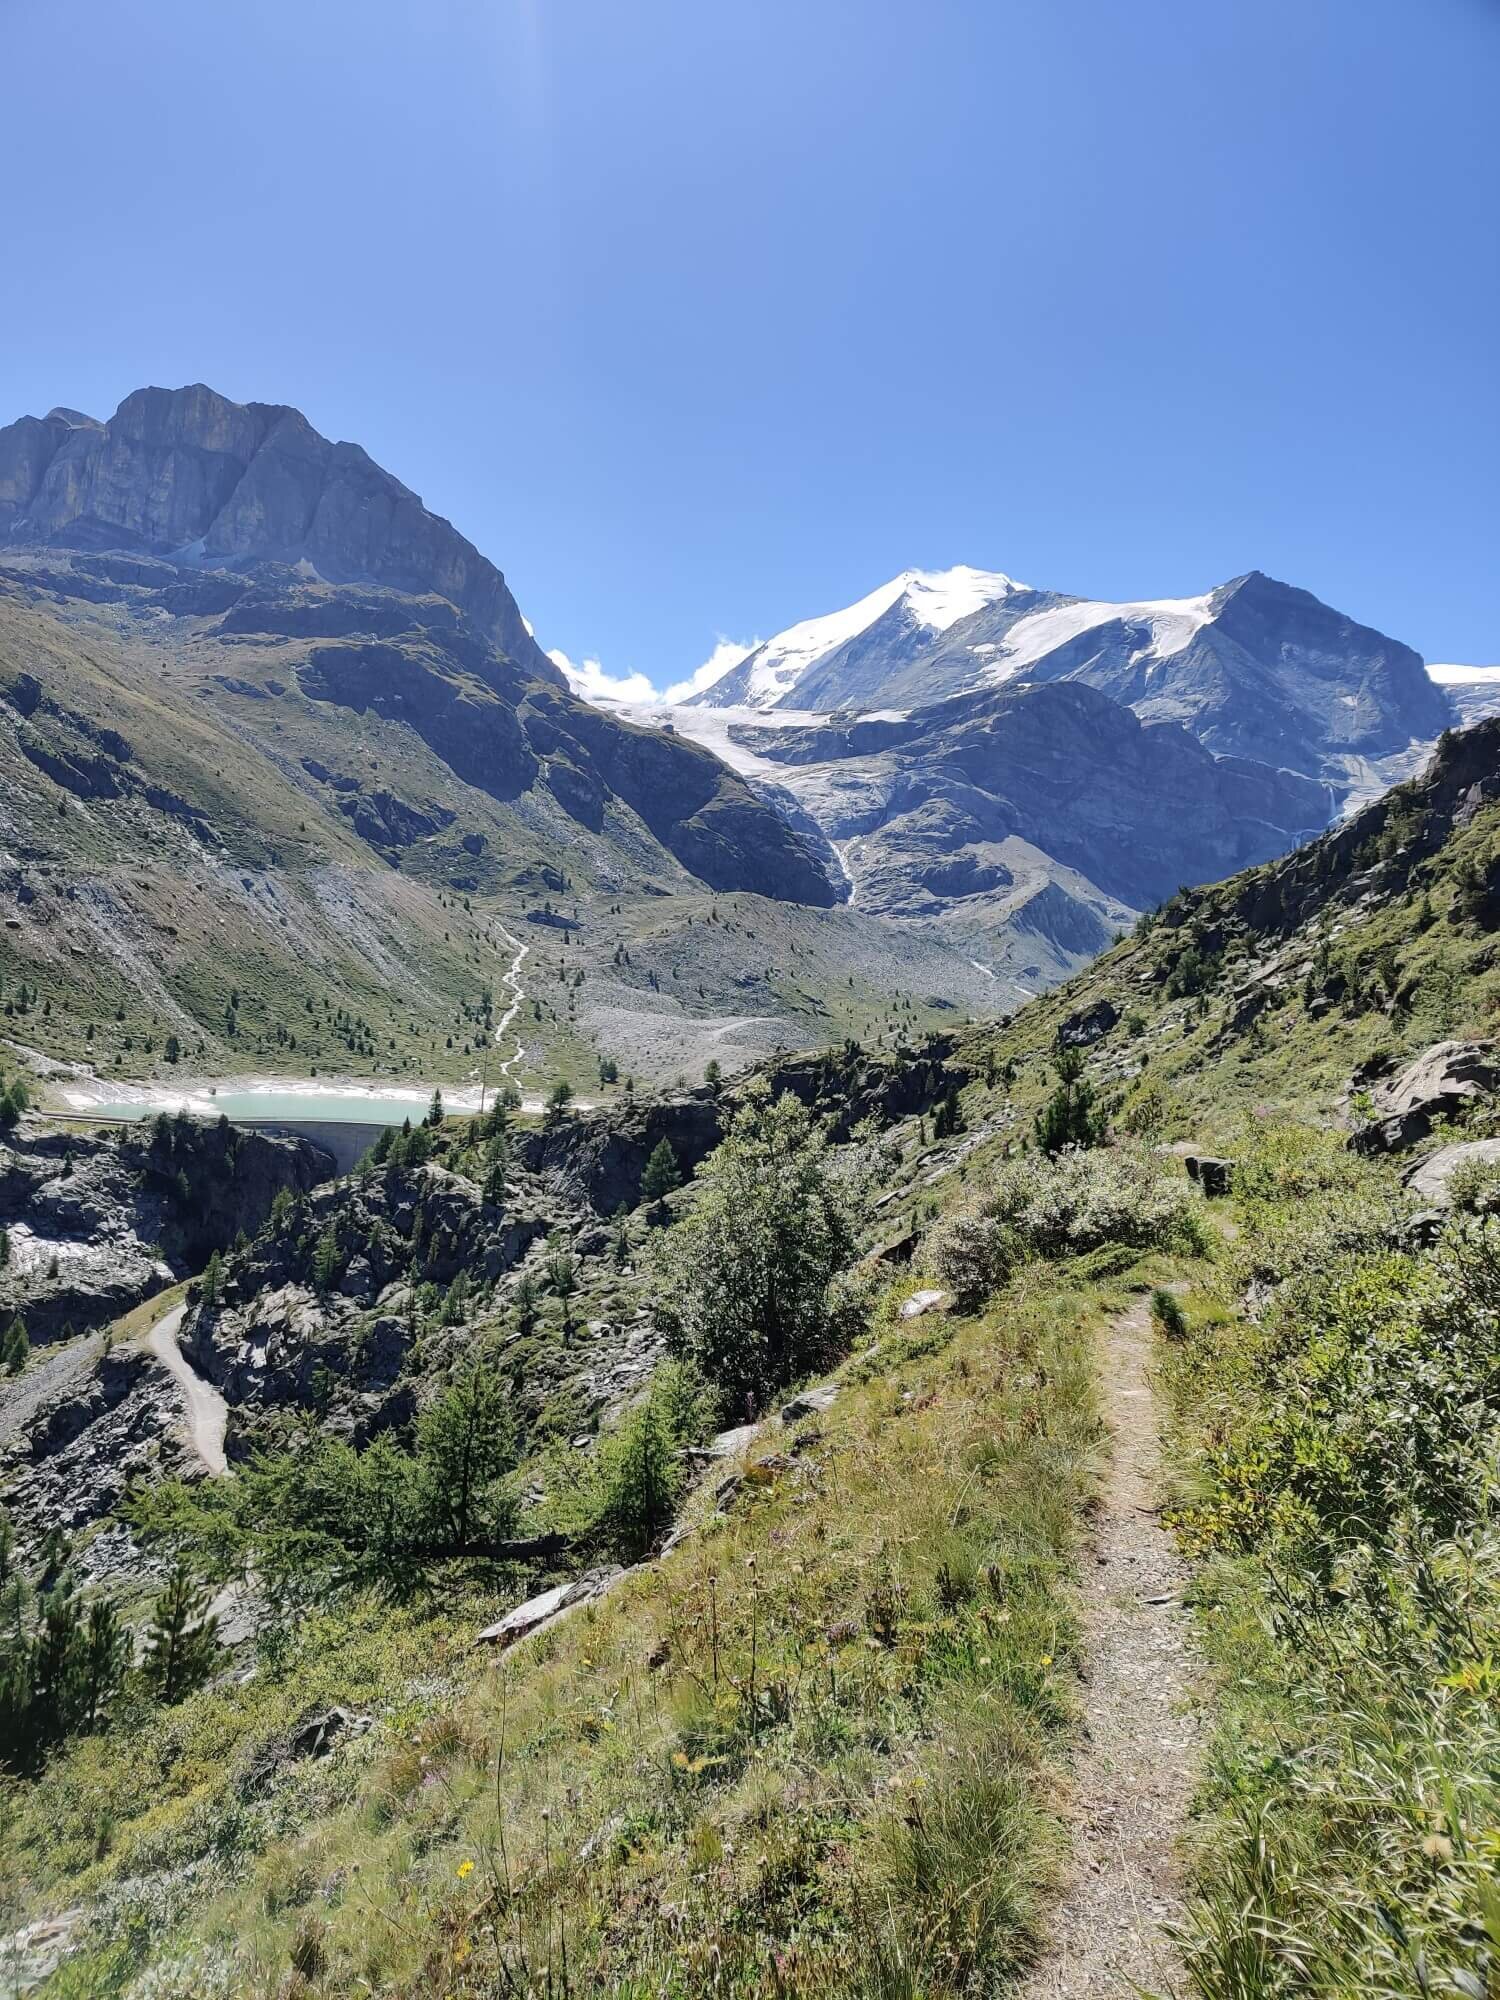 Approaching the end of the Turtmann valley